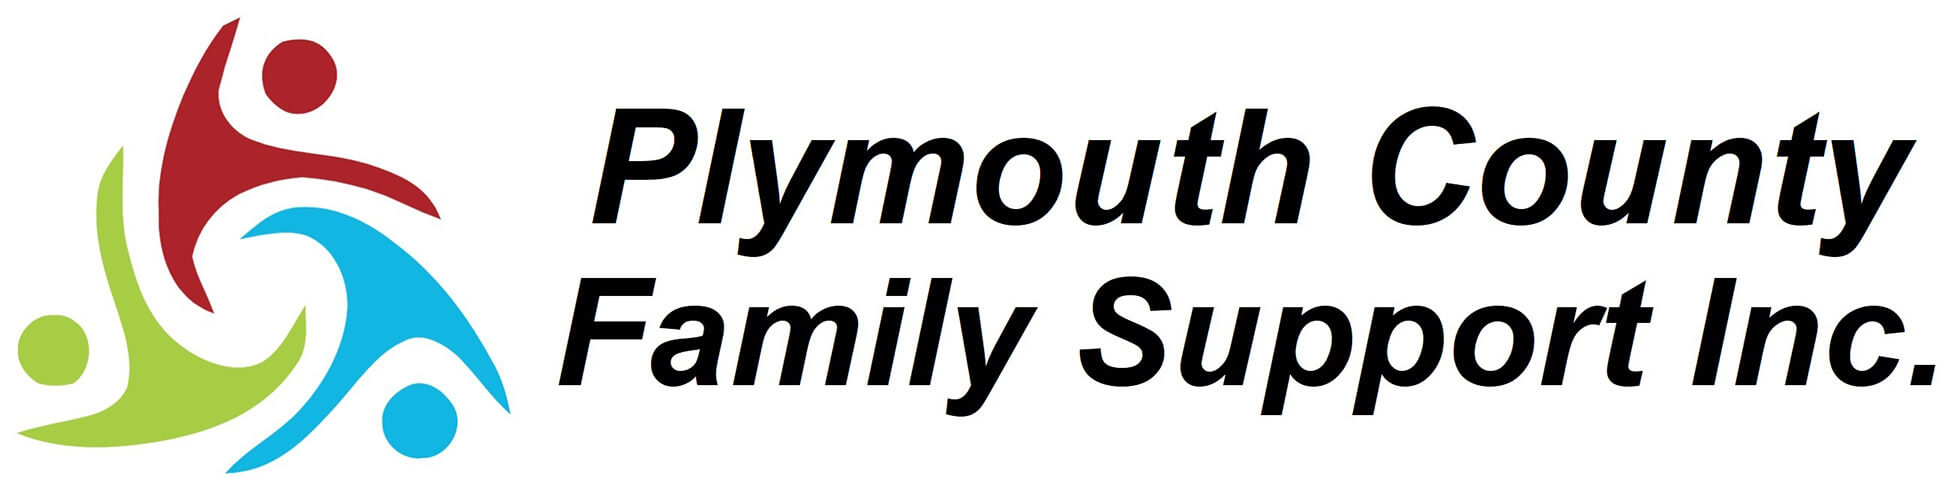 Plymouth County Family Support Inc.